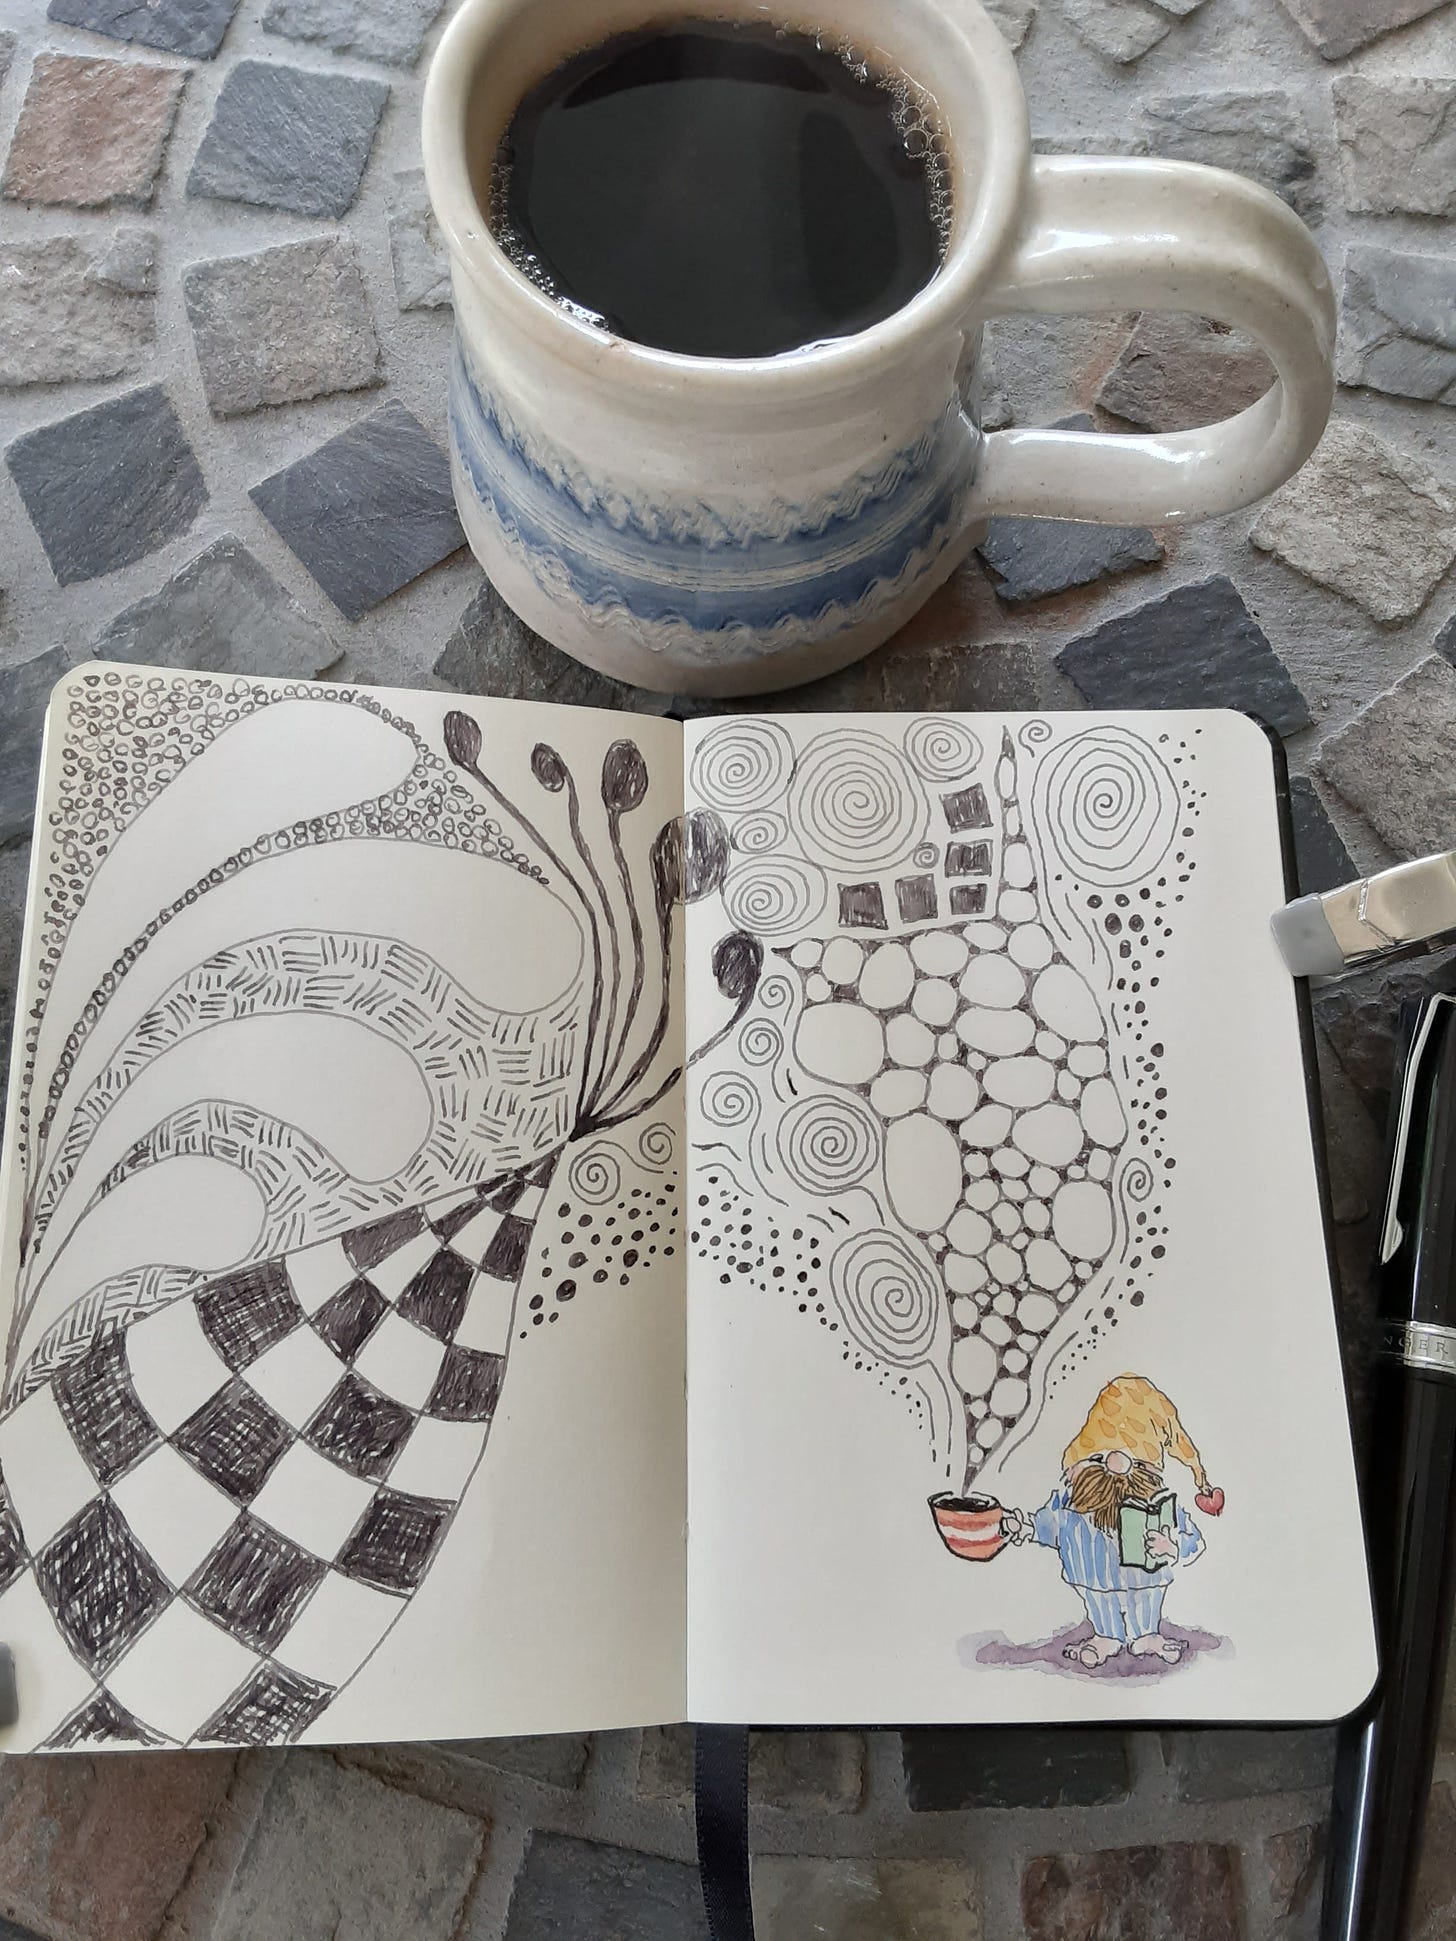 Coffee and sketch by Sue Clancy